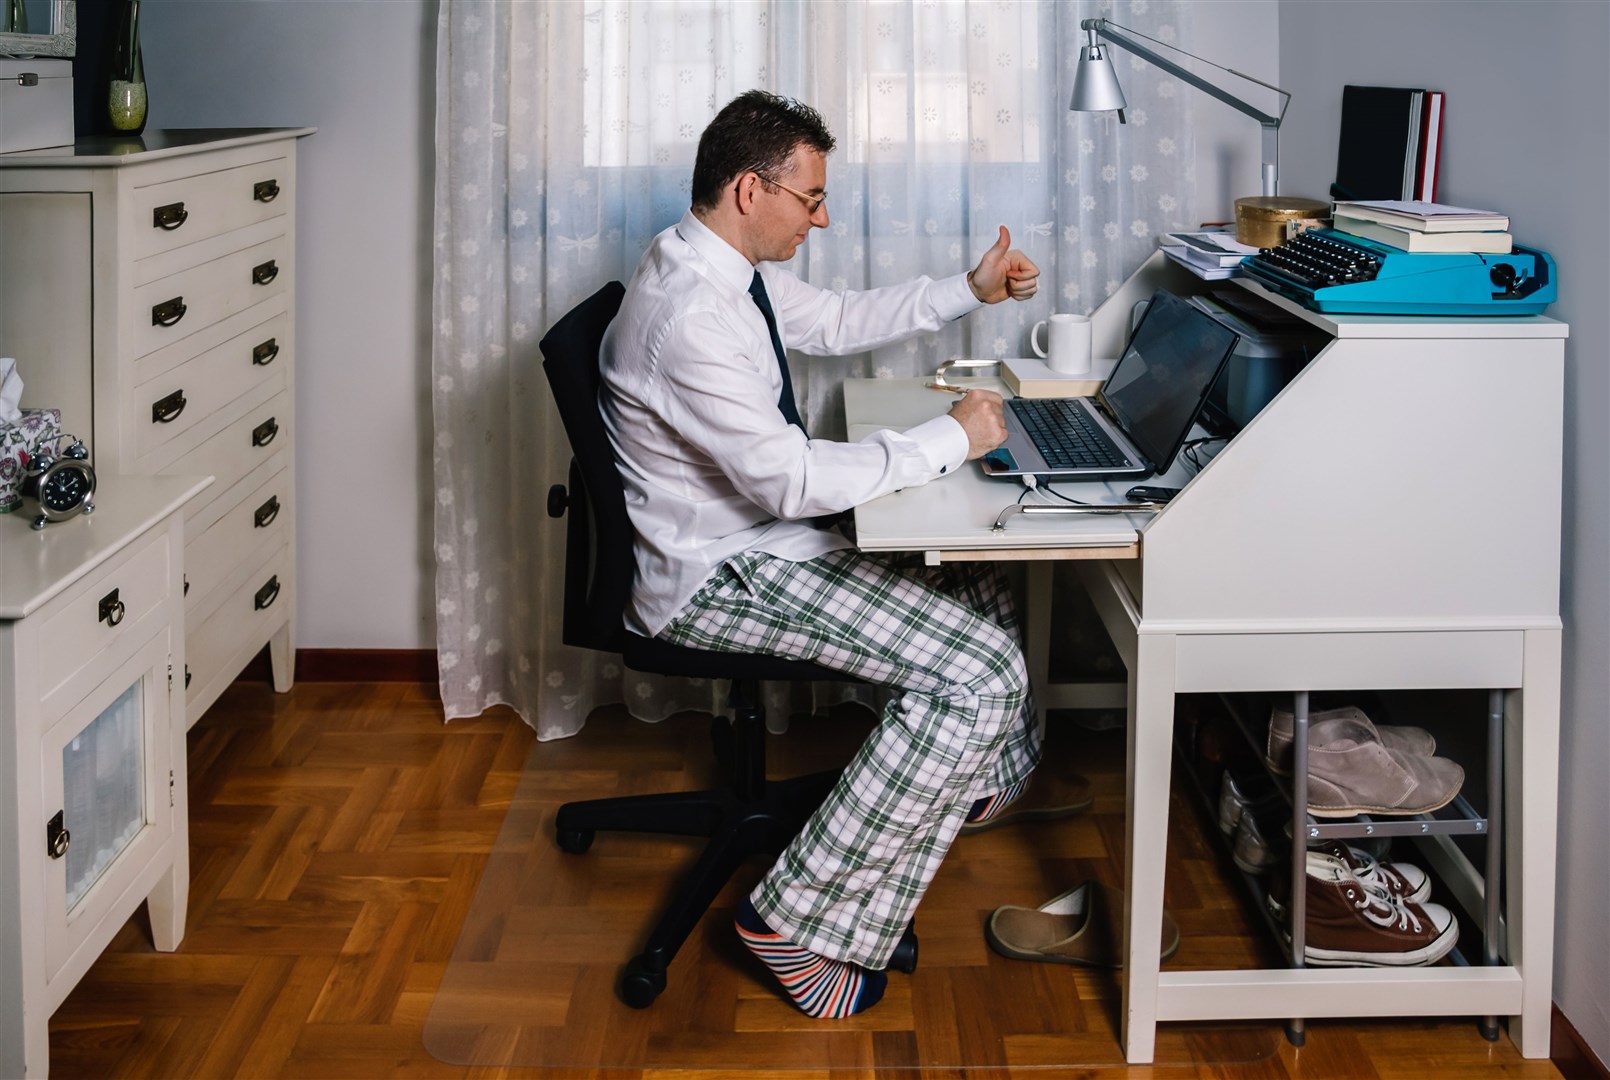 Some interesting fashion choices may be made while working from home.